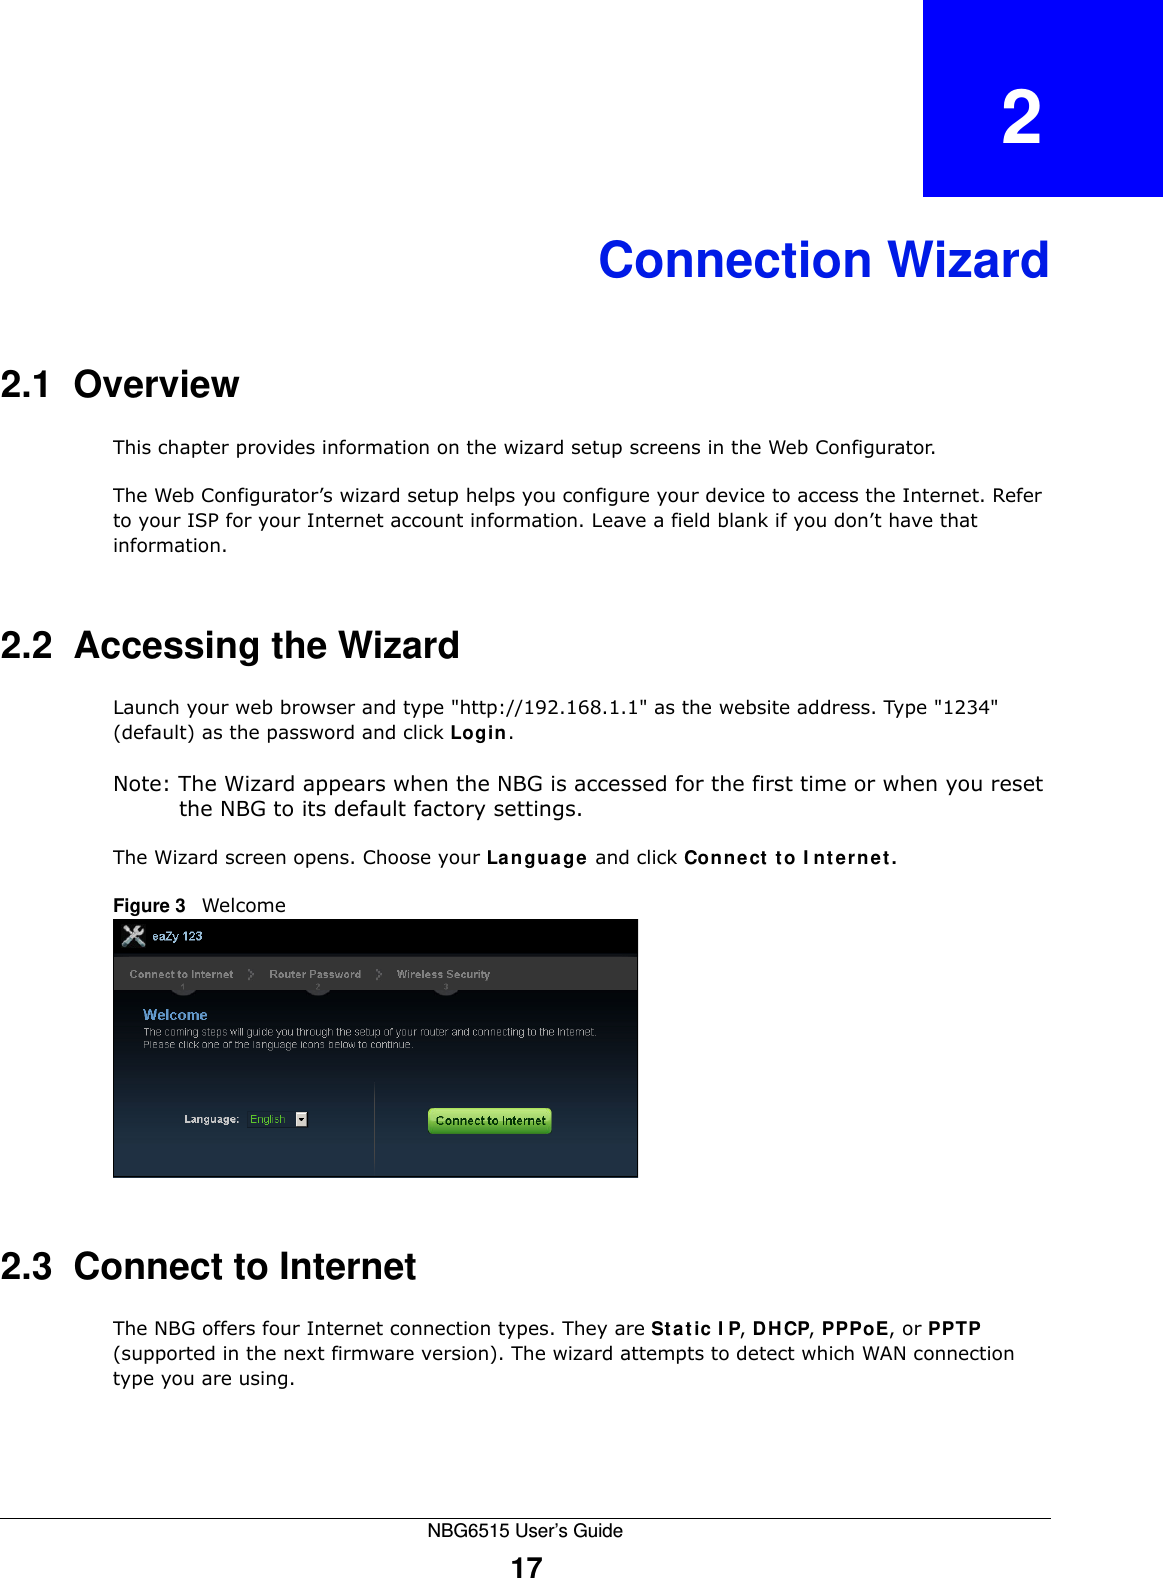 NBG6515 User’s Guide17CHAPTER   2Connection Wizard2.1  OverviewThis chapter provides information on the wizard setup screens in the Web Configurator.The Web Configurator’s wizard setup helps you configure your device to access the Internet. Refer to your ISP for your Internet account information. Leave a field blank if you don’t have that information.2.2  Accessing the WizardLaunch your web browser and type &quot;http://192.168.1.1&quot; as the website address. Type &quot;1234&quot; (default) as the password and click Login.Note: The Wizard appears when the NBG is accessed for the first time or when you reset the NBG to its default factory settings.The Wizard screen opens. Choose your Language and click Connect to Internet.Figure 3   Welcome 2.3  Connect to InternetThe NBG offers four Internet connection types. They are Static IP, DHCP, PPPoE, or PPTP (supported in the next firmware version). The wizard attempts to detect which WAN connection type you are using.  